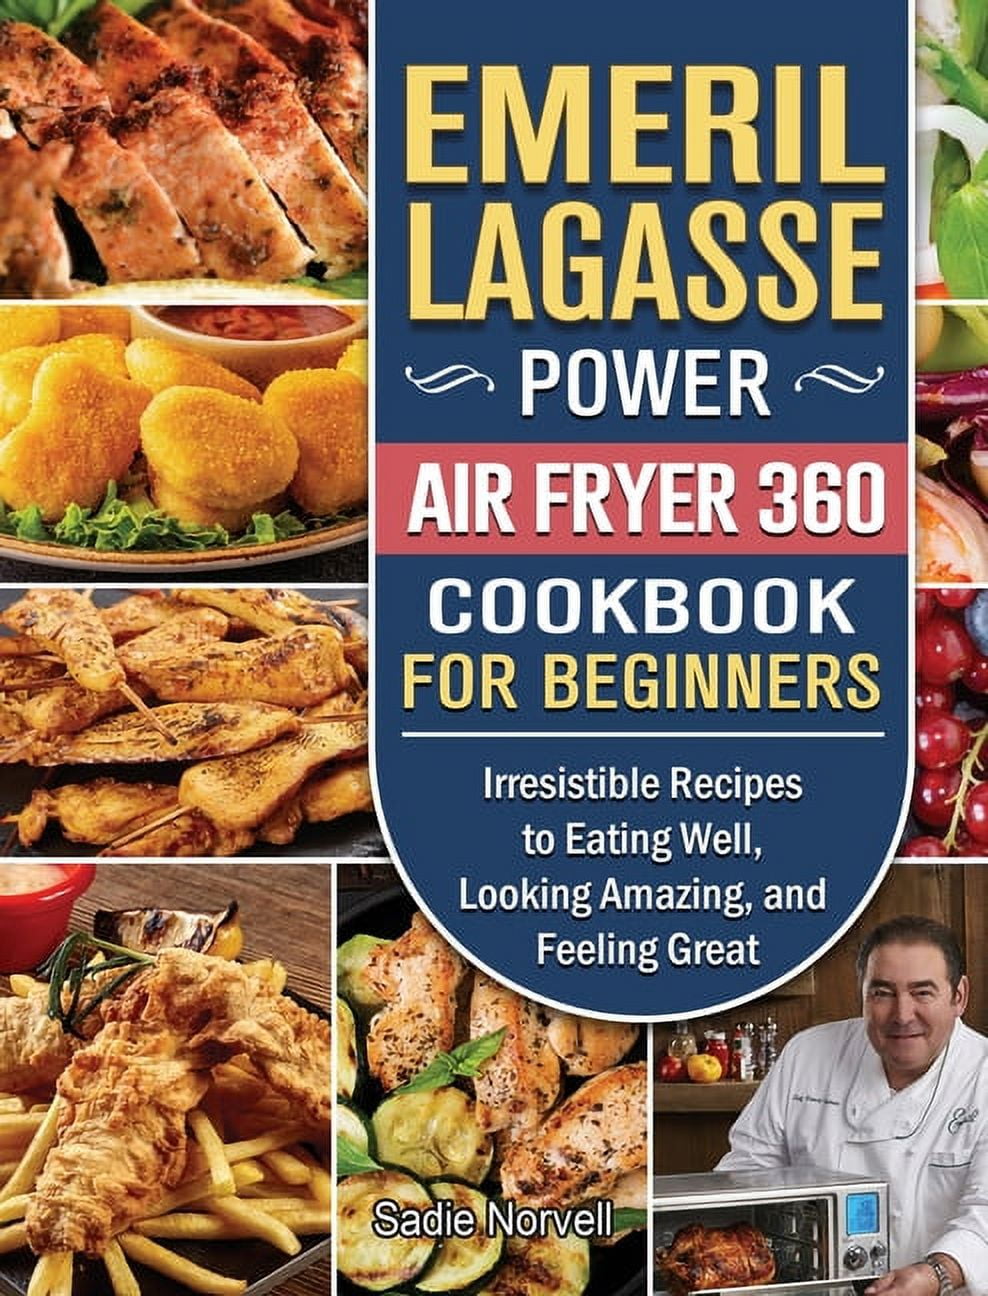 EMERIL LAGASSE POWER AIR FRYER 360 Cookbook: The Complete Guide Recipe Book  to Air Fry, Bake, Rotisserie, Dehydrate, Toast, Roast, Broil, Bagel, and S  (Paperback)